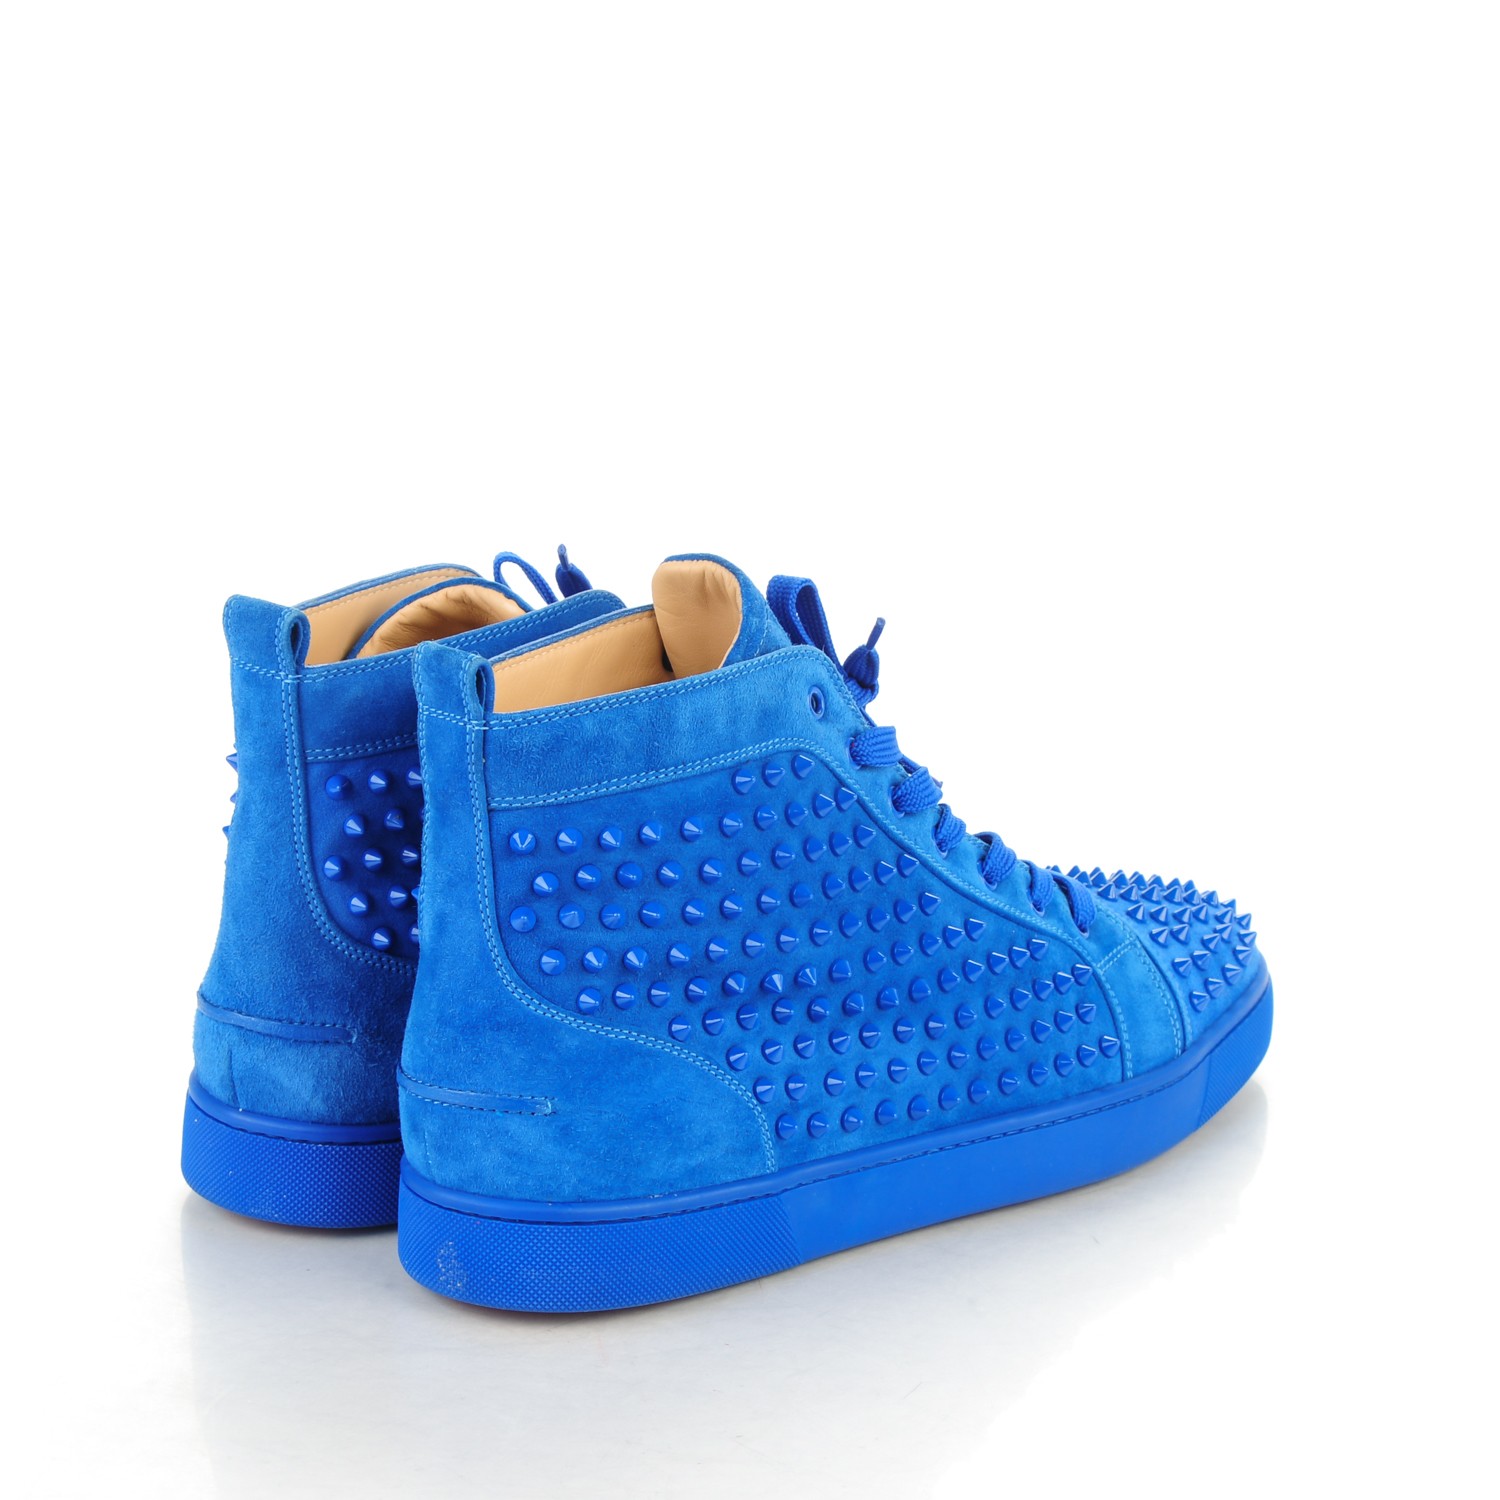 gear indre sirene CHRISTIAN LOUBOUTIN Mens Suede Louis Spikes Flat Sneakers 47 Electric Blue  160906 | FASHIONPHILE